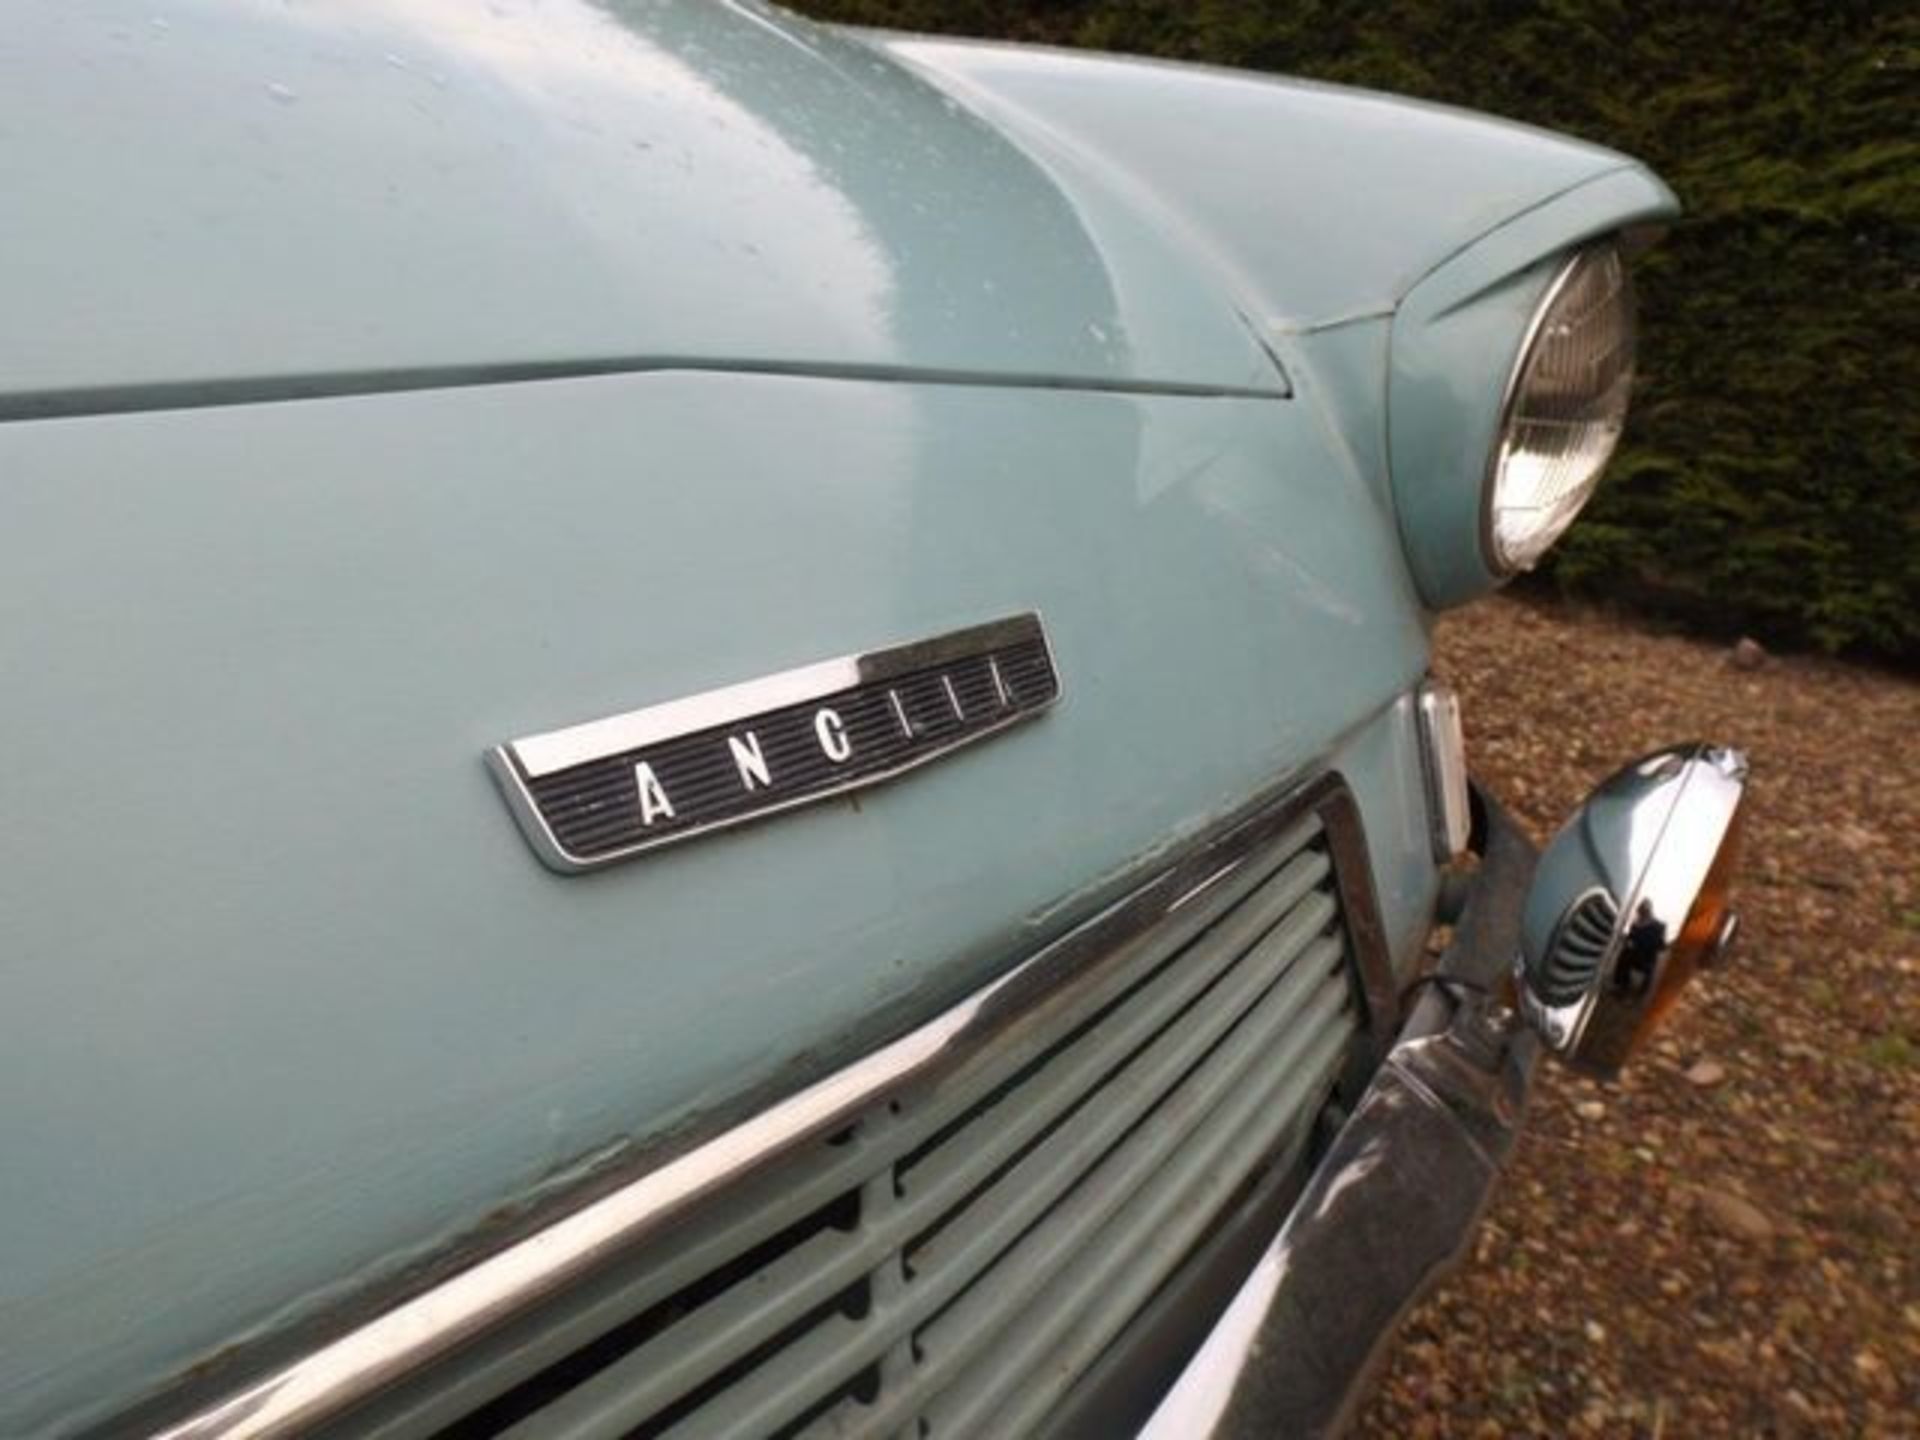 FORD ANGLIA DELUXE - Image 3 of 19